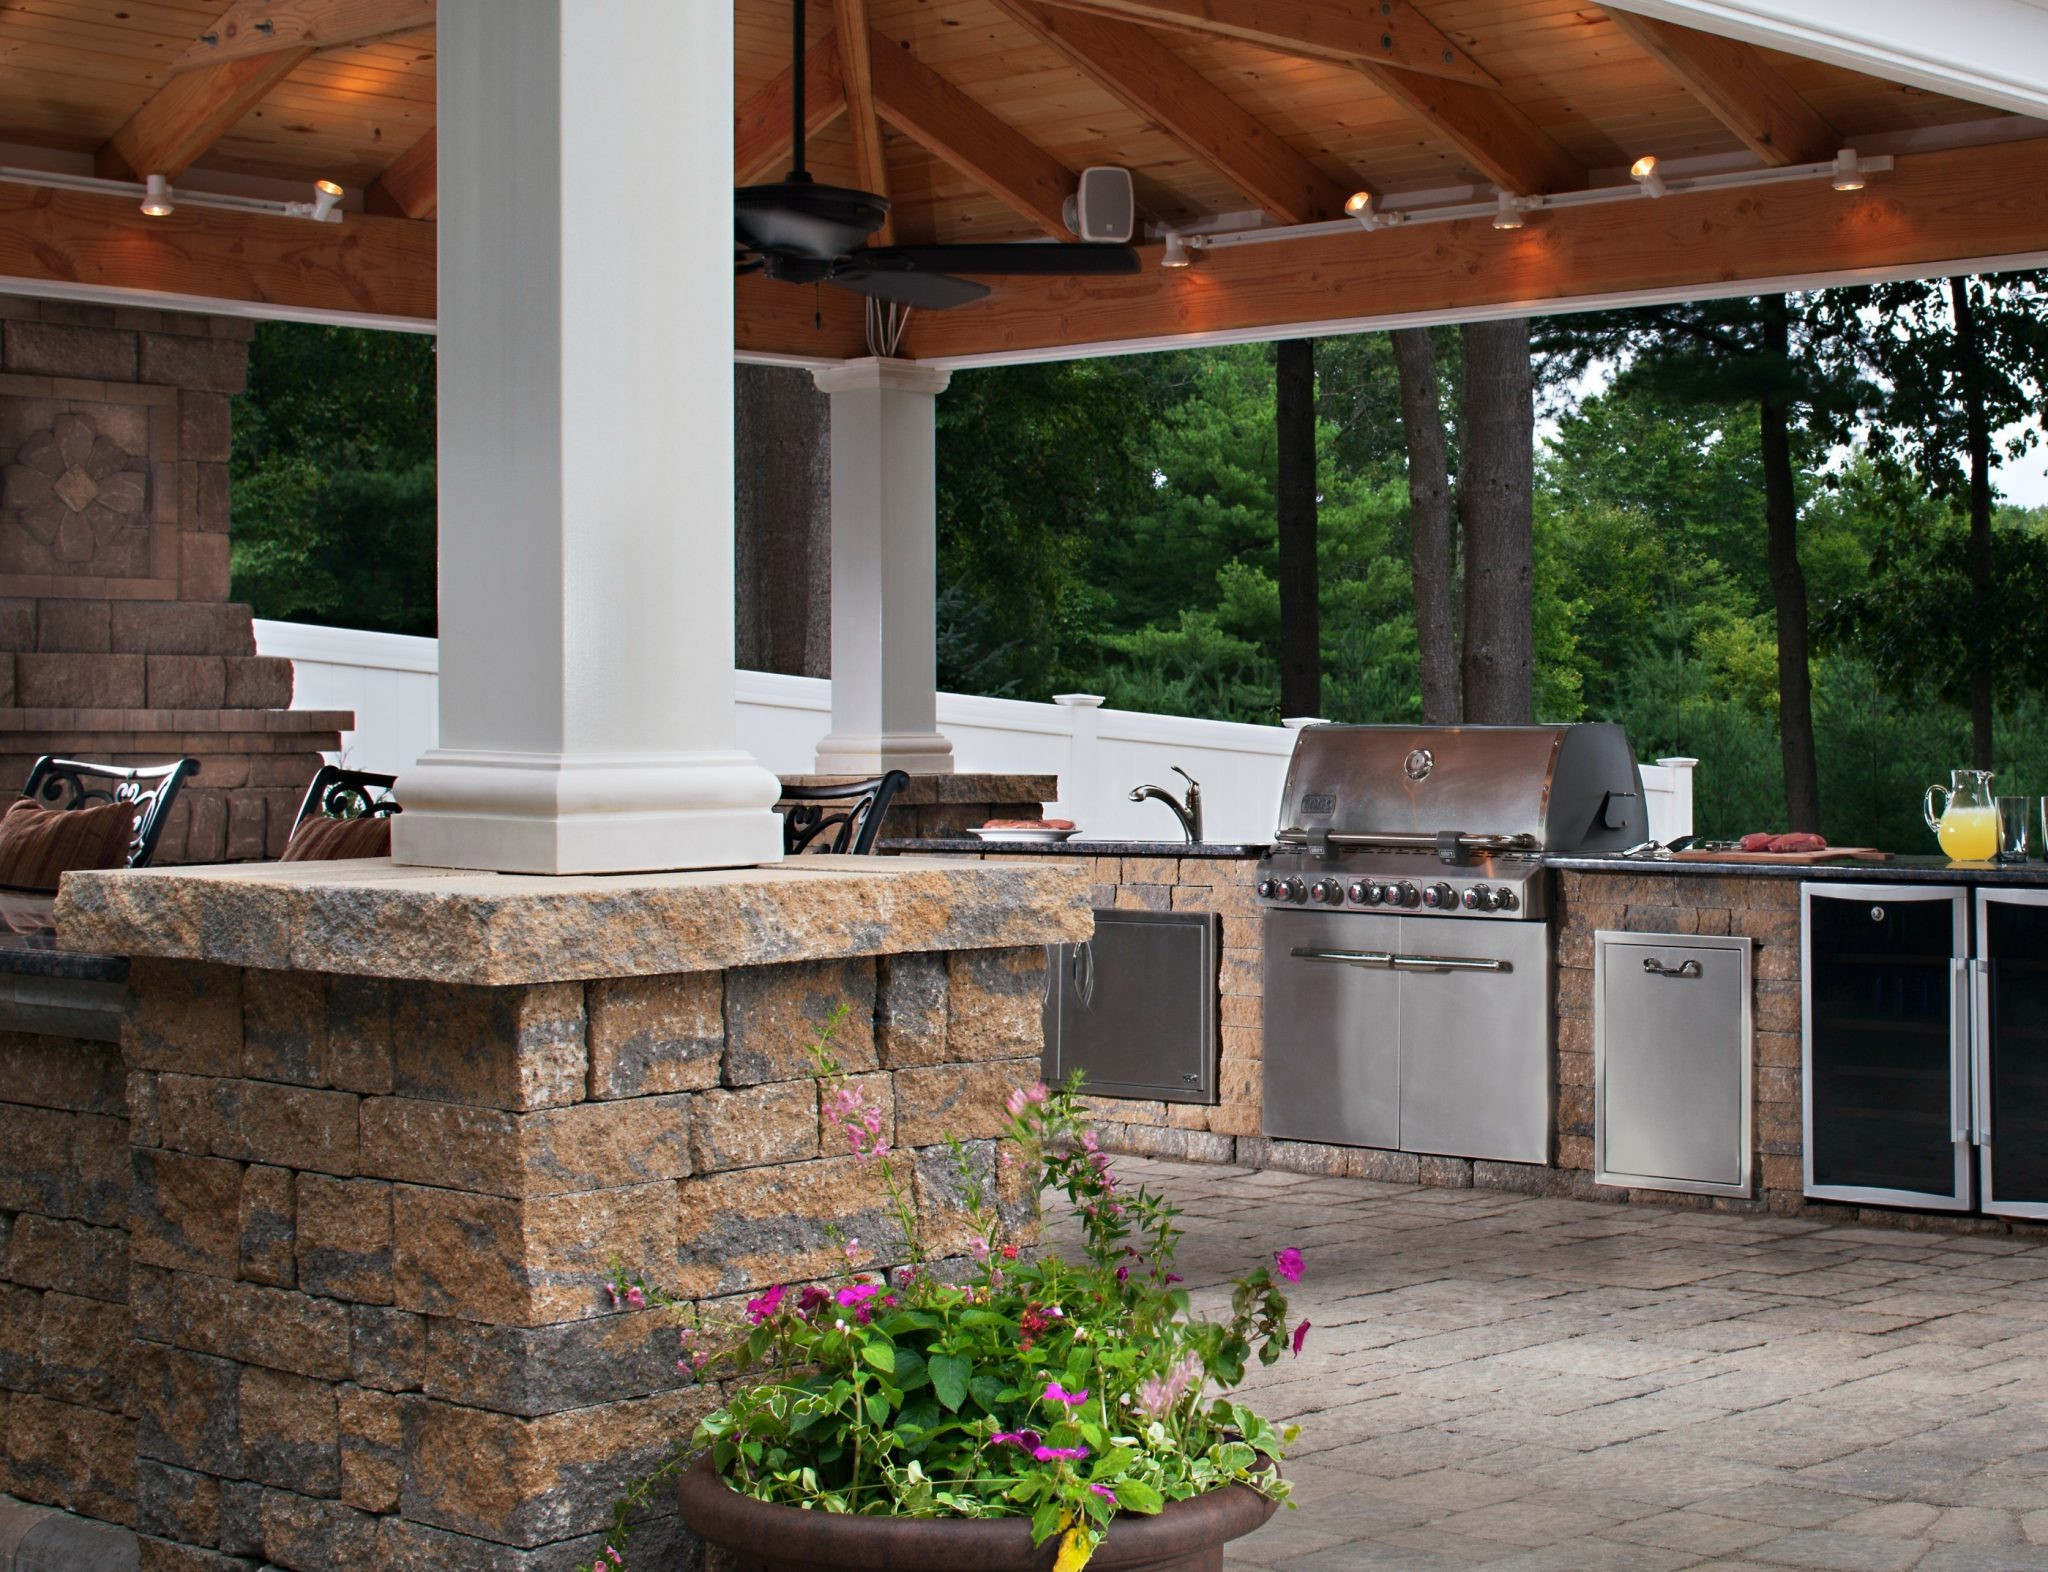 Outdoor Kitchen Covered Patio
 Outdoor Kitchen Trends 9 HOT Ideas For Your Backyard